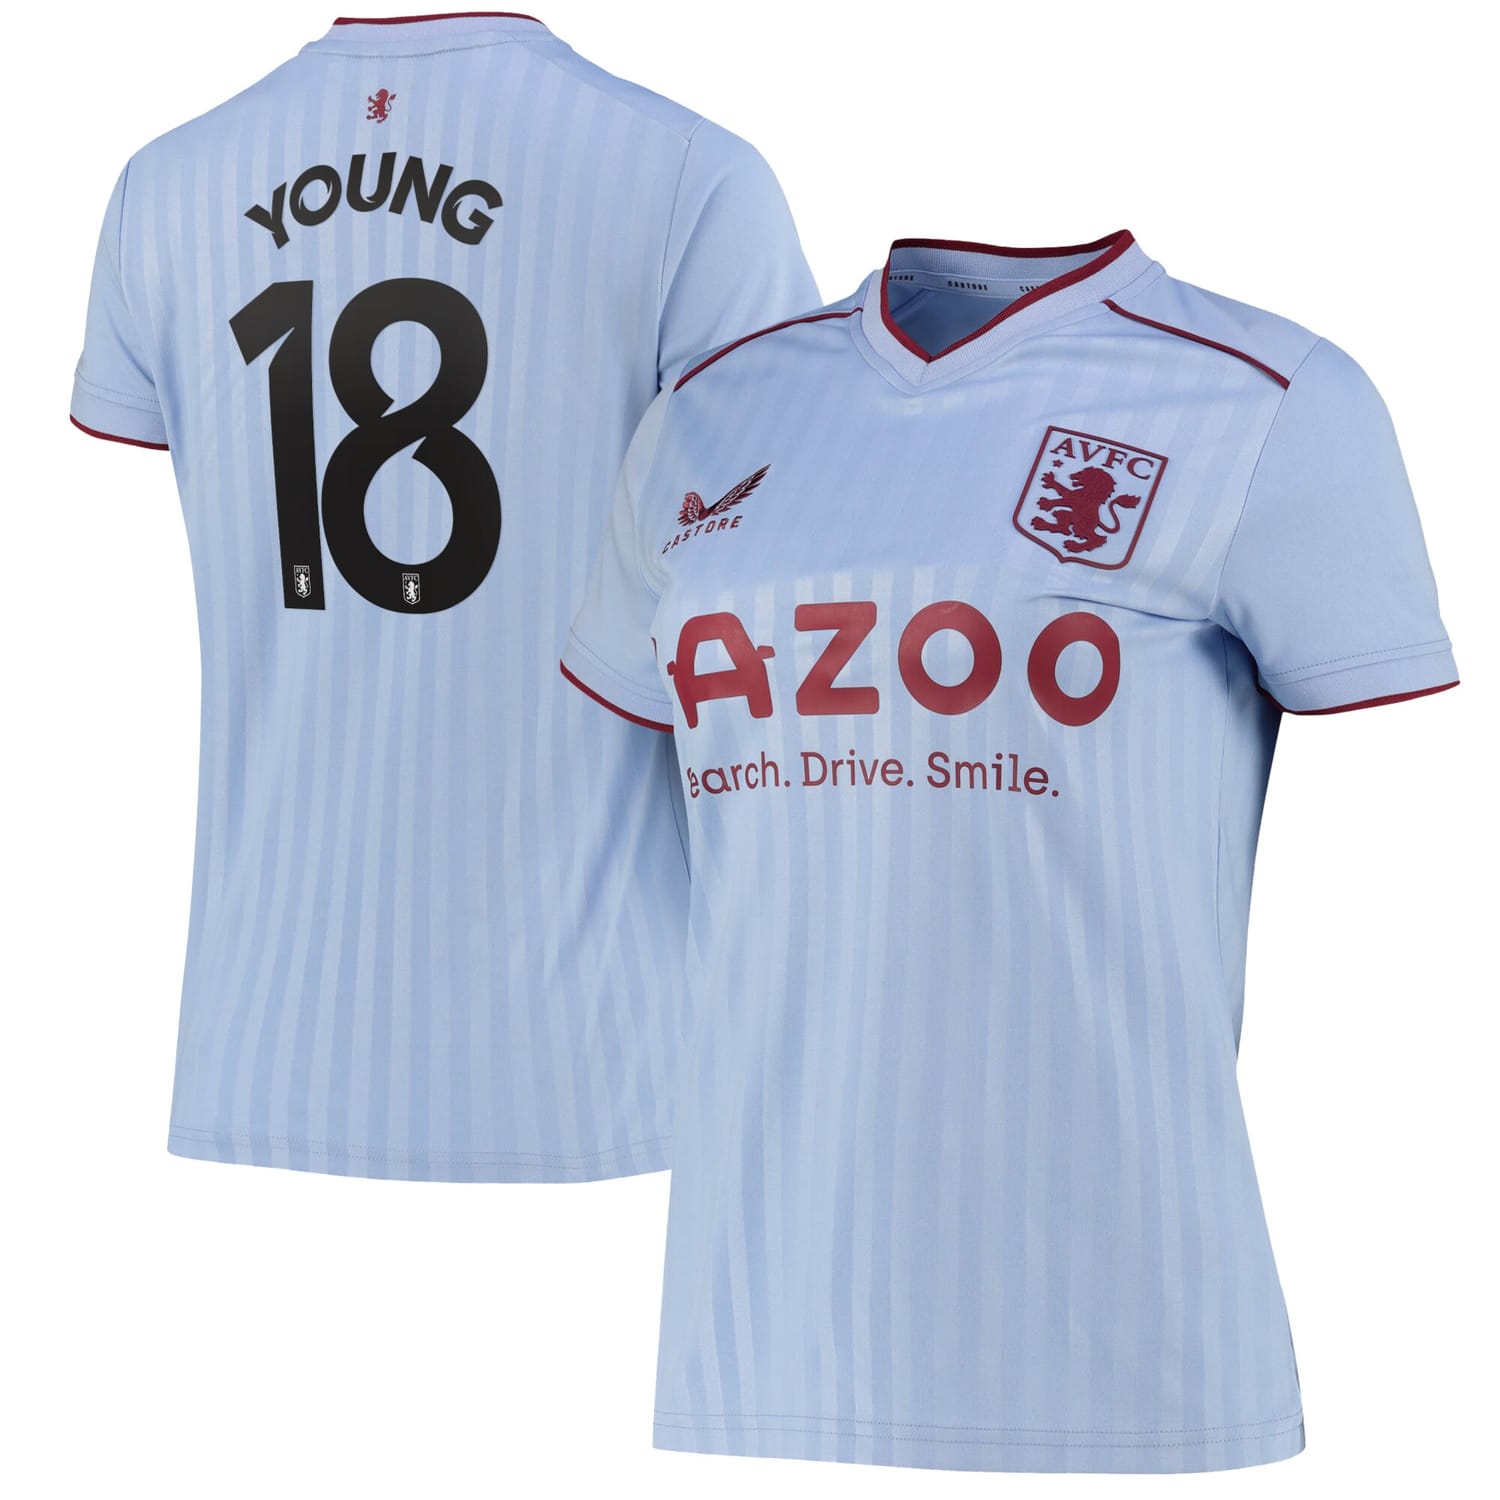 Premier League Aston Villa Away Cup Jersey Shirt 2022-23 player Ashley Young 18 printing for Women